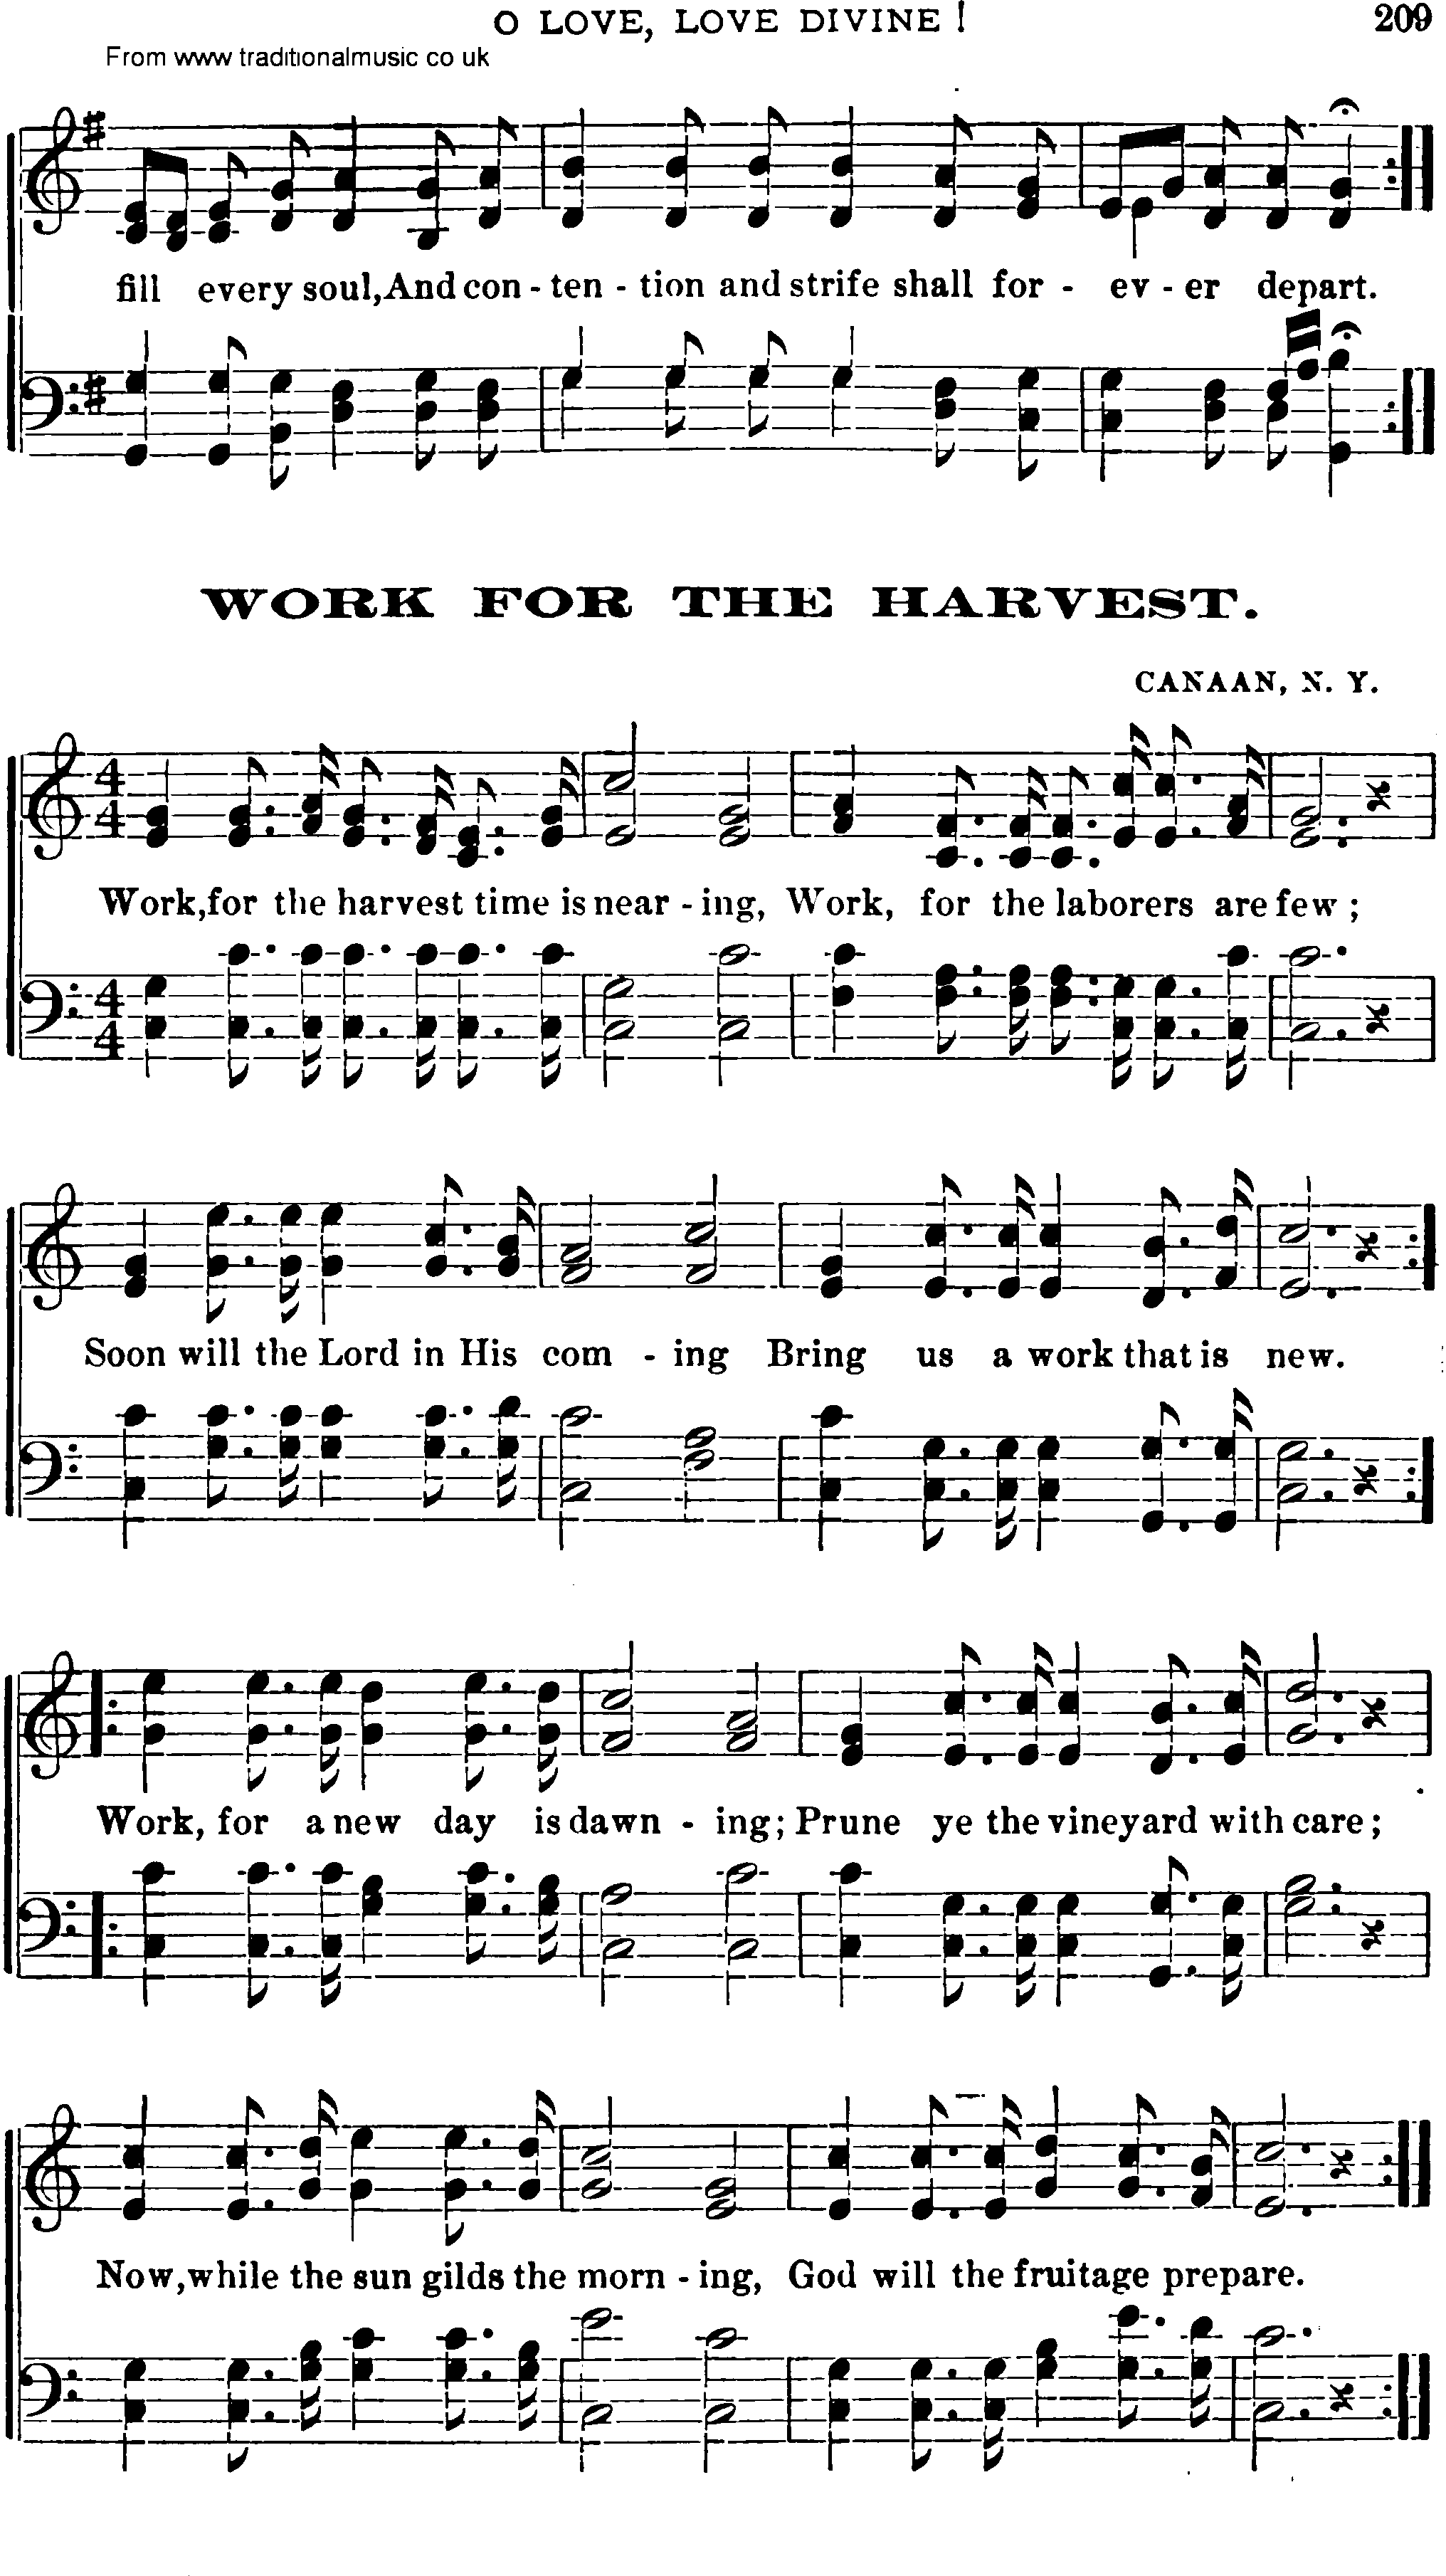 Shaker Music collection, Hymn: Work For The Harvest, sheetmusic and PDF